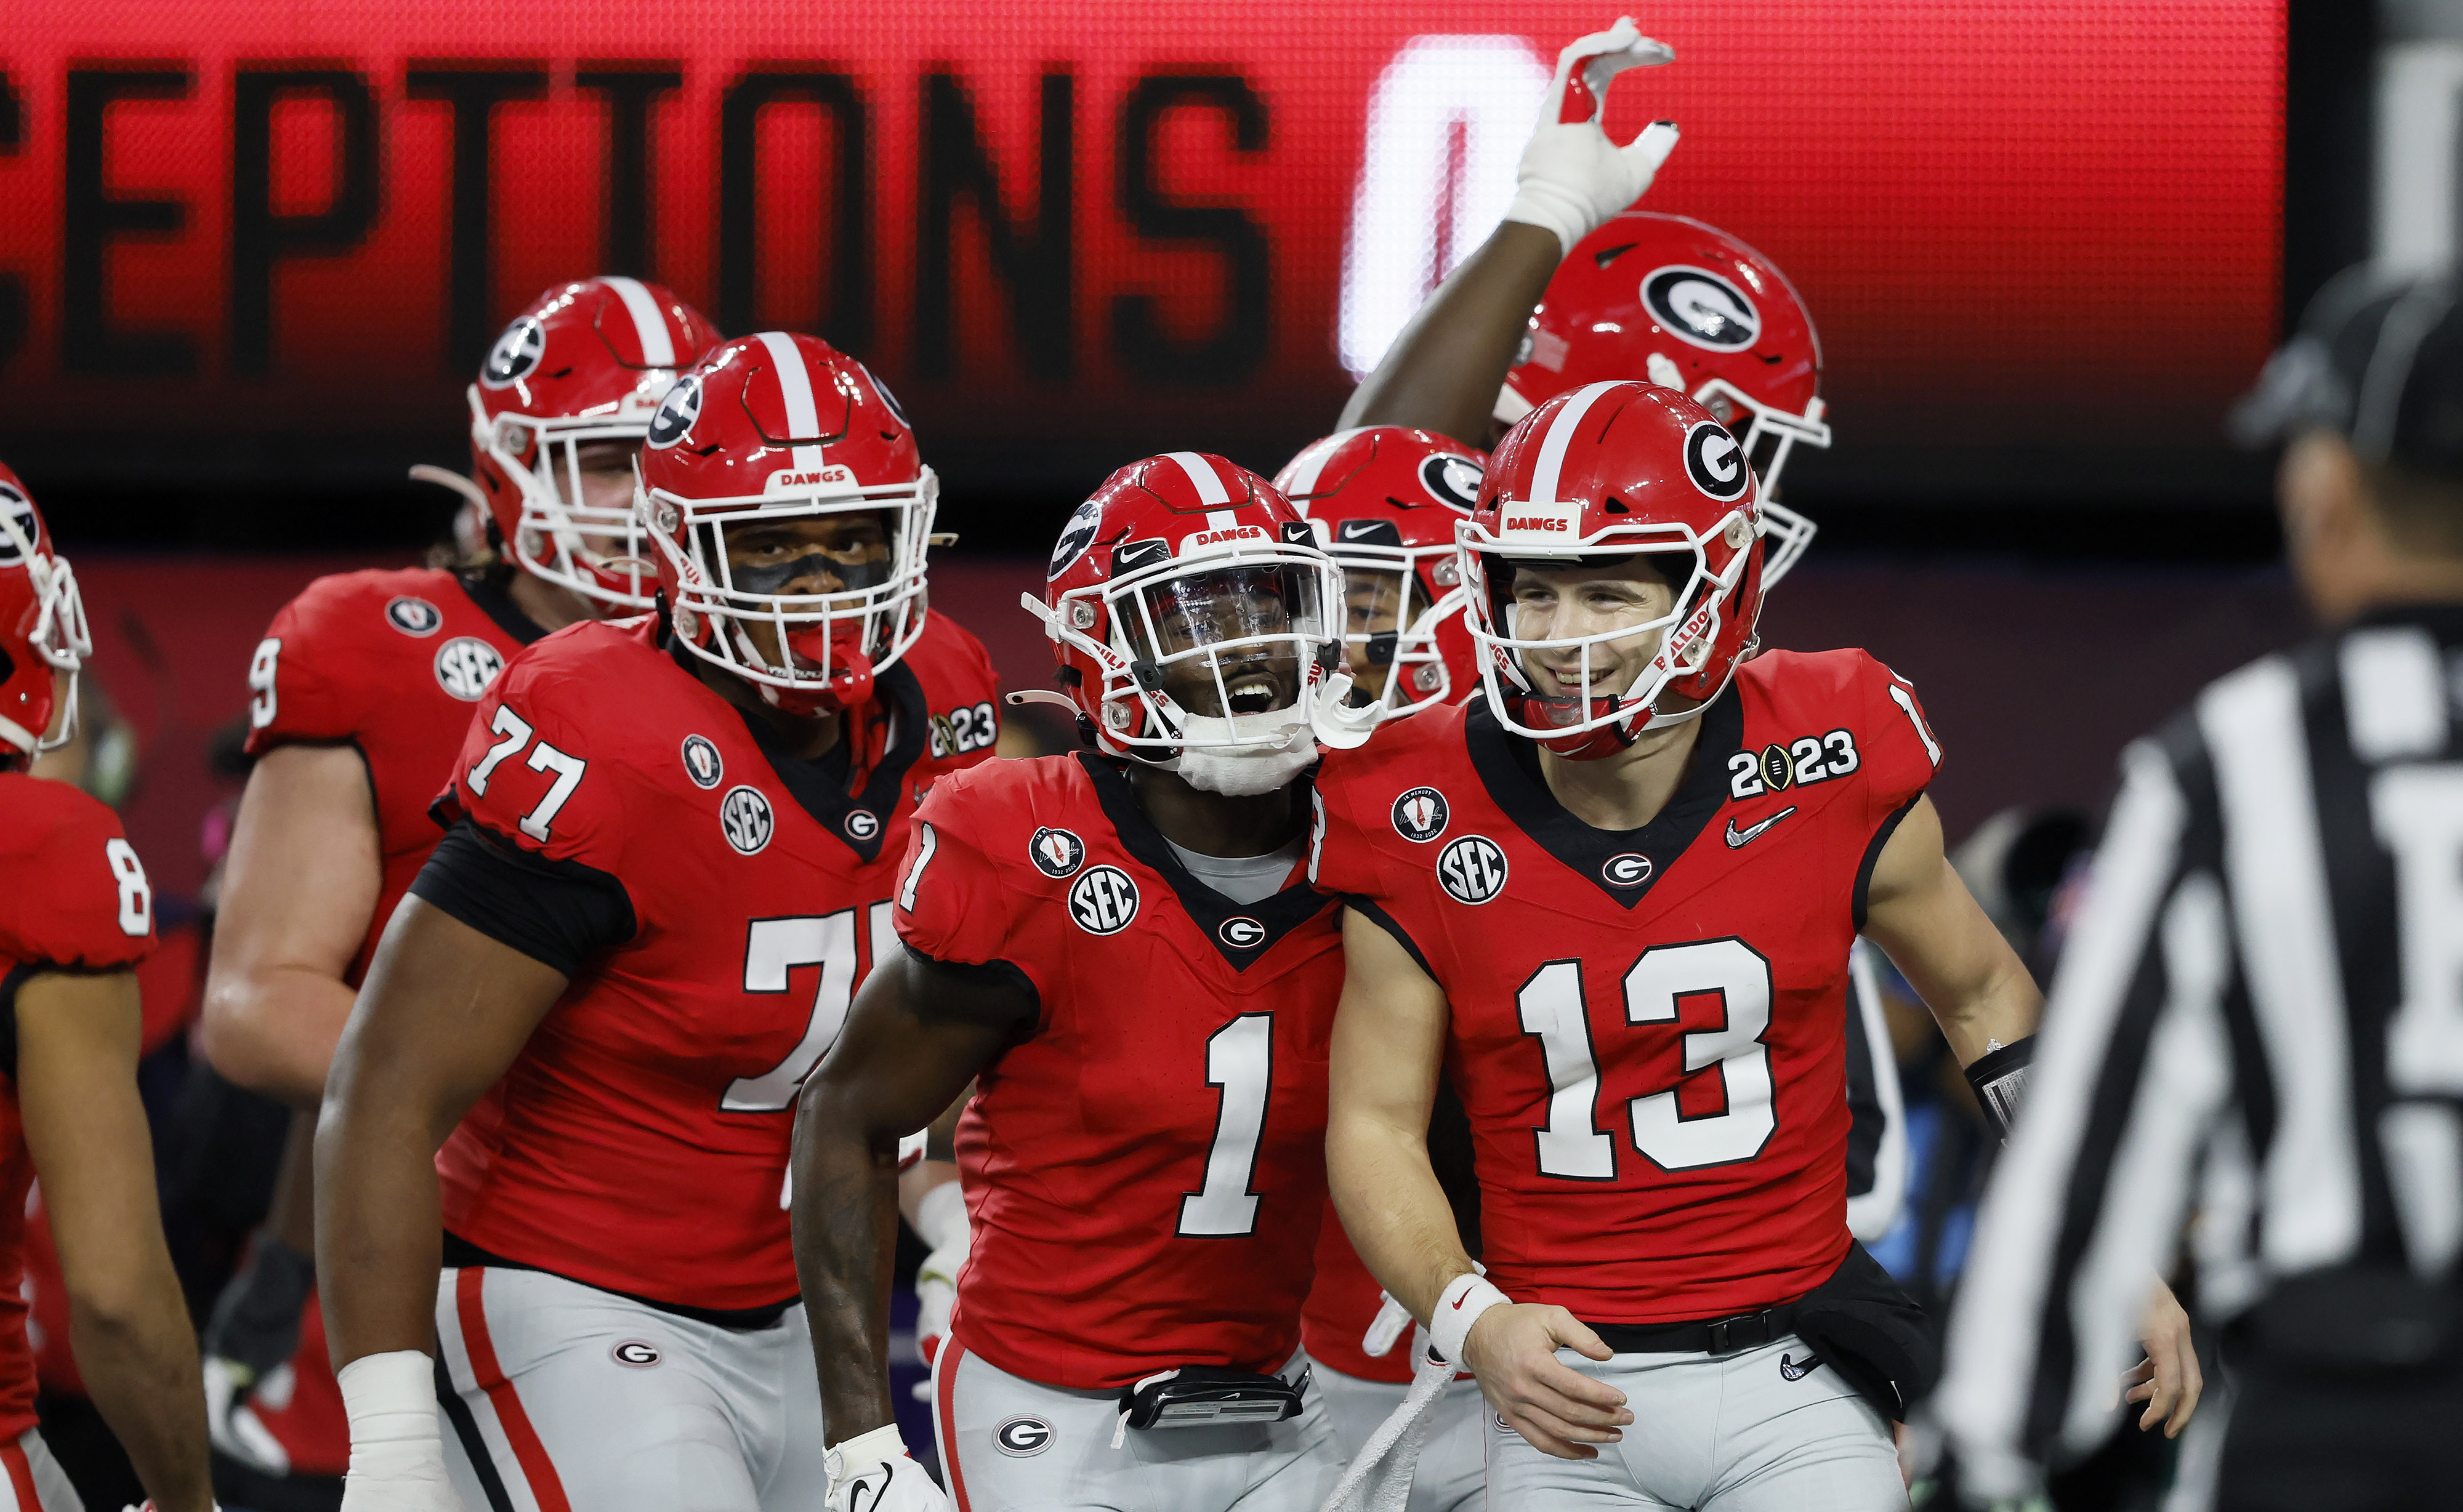 Georgia Bulldogs cement legend with back-to-back national titles